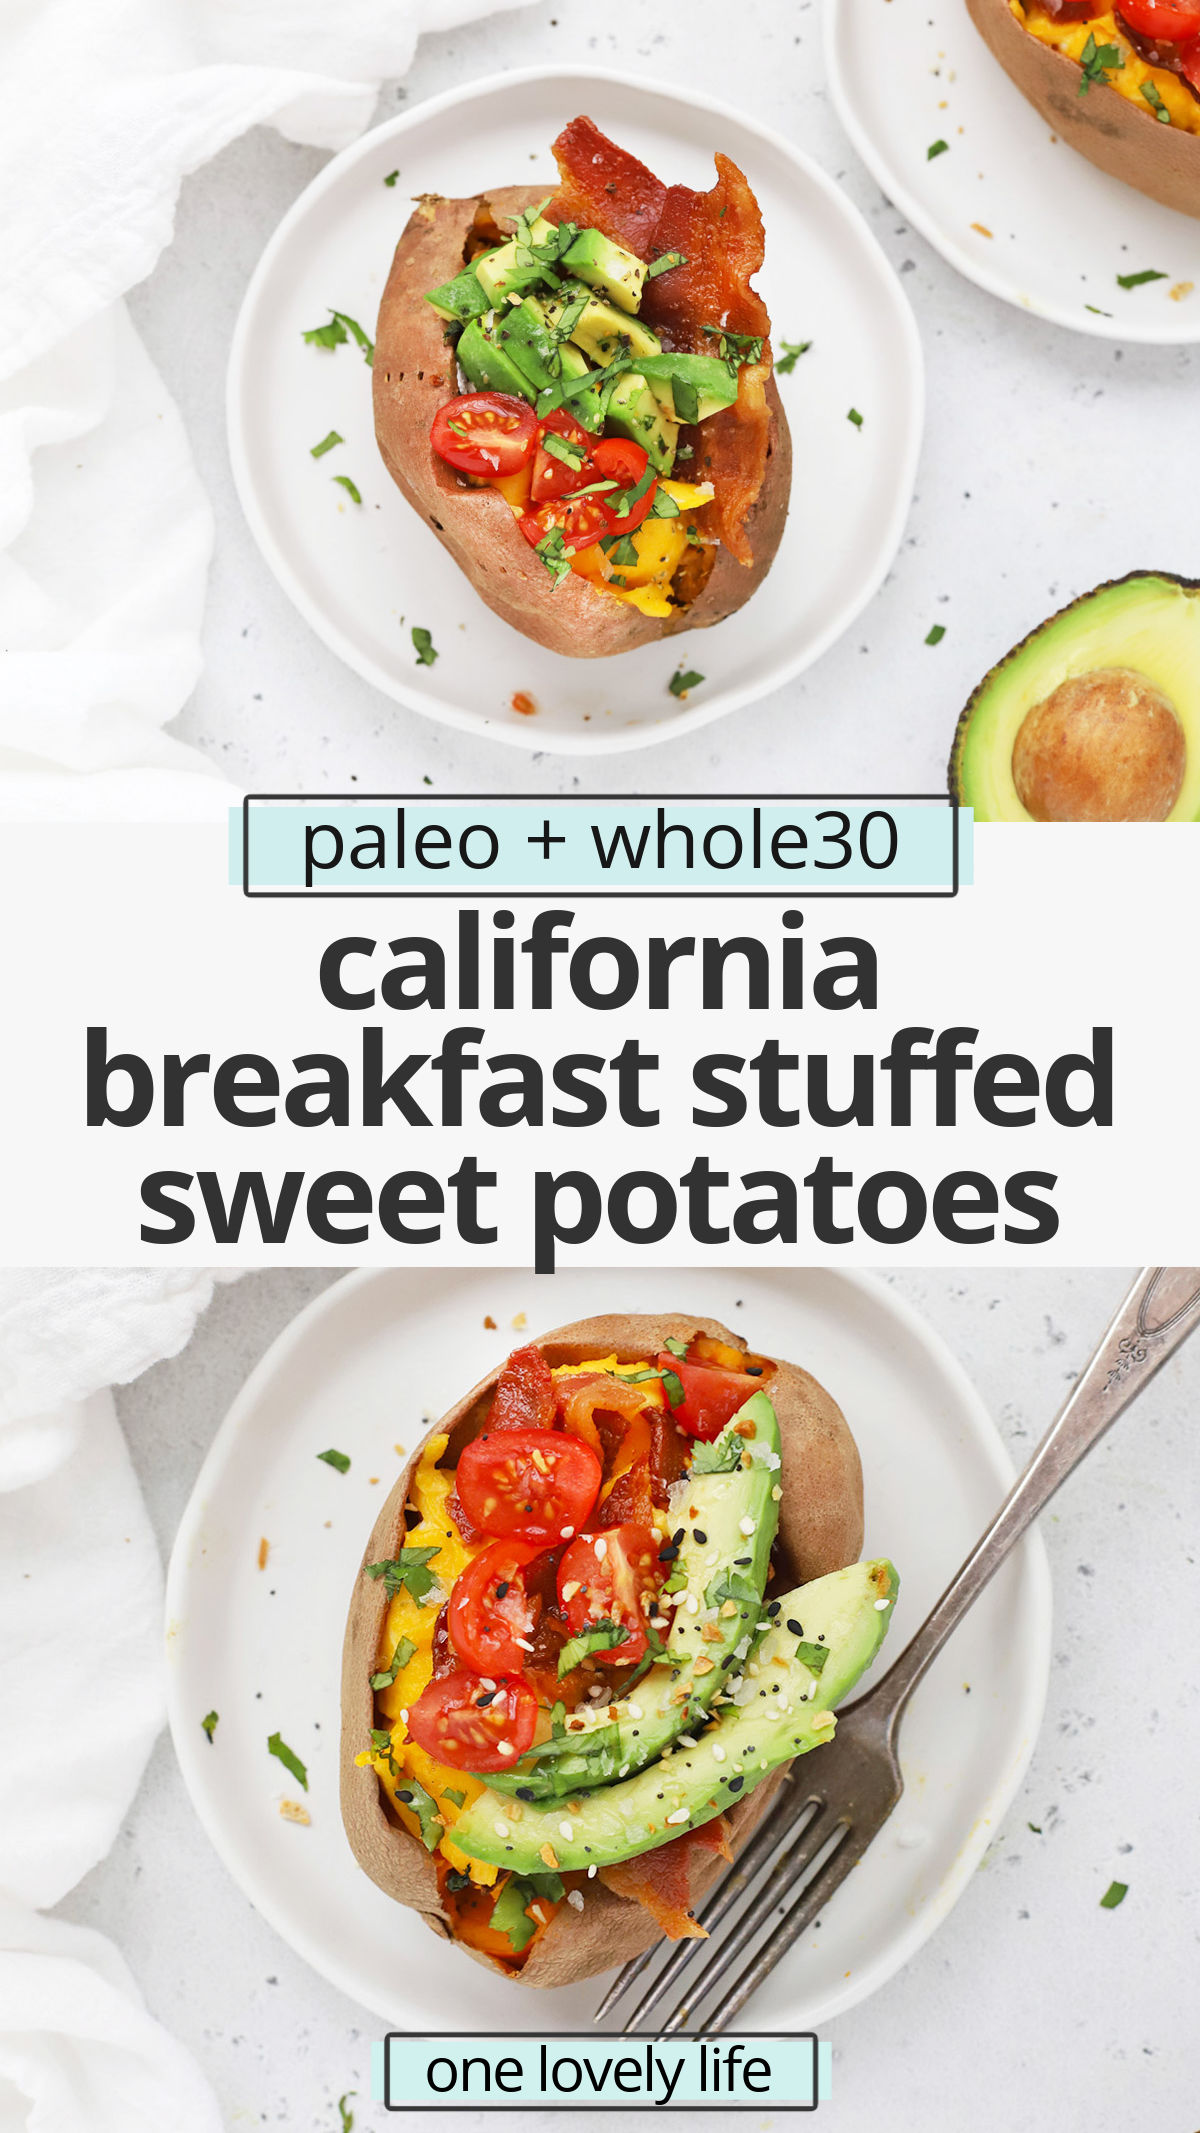 California Breakfast Stuffed Sweet Potatoes - This savory breakfast is loaded with goodies for a delicious start to the day! (Paleo, Whole30) // Whole30 breakfast // paleo breakfast // healthy breakfast // breakfast stuffed sweet potato recipe // gluten-free // stuffed sweet potatoes #breakfast #paleo #whole30 #healthy